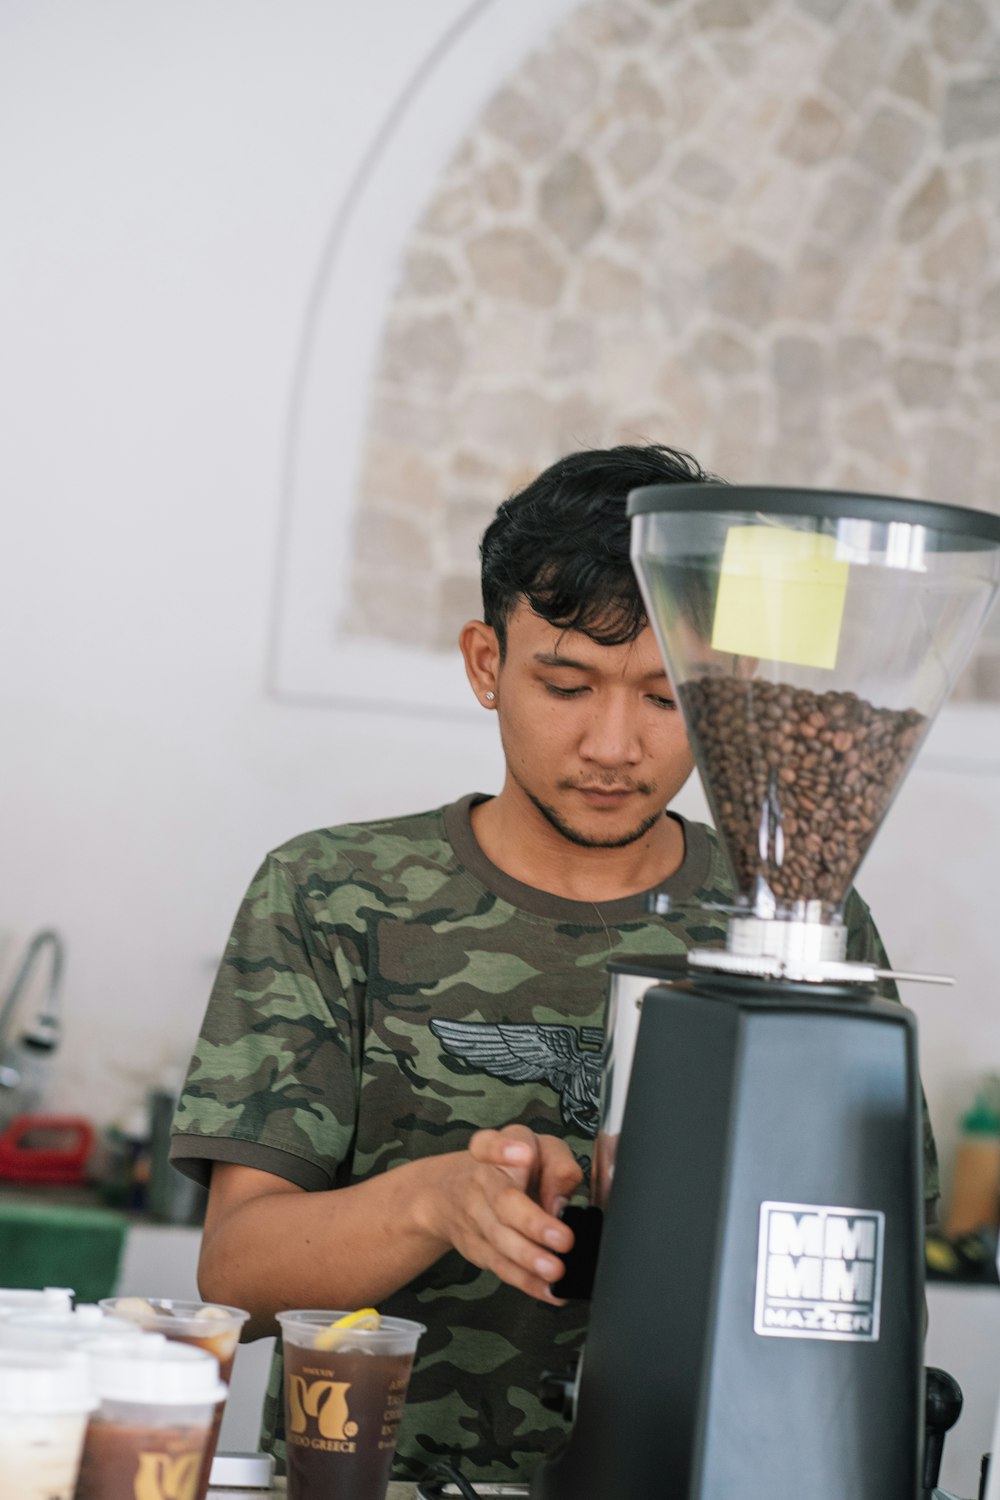 a man in camouflage shirt using a coffee grinder